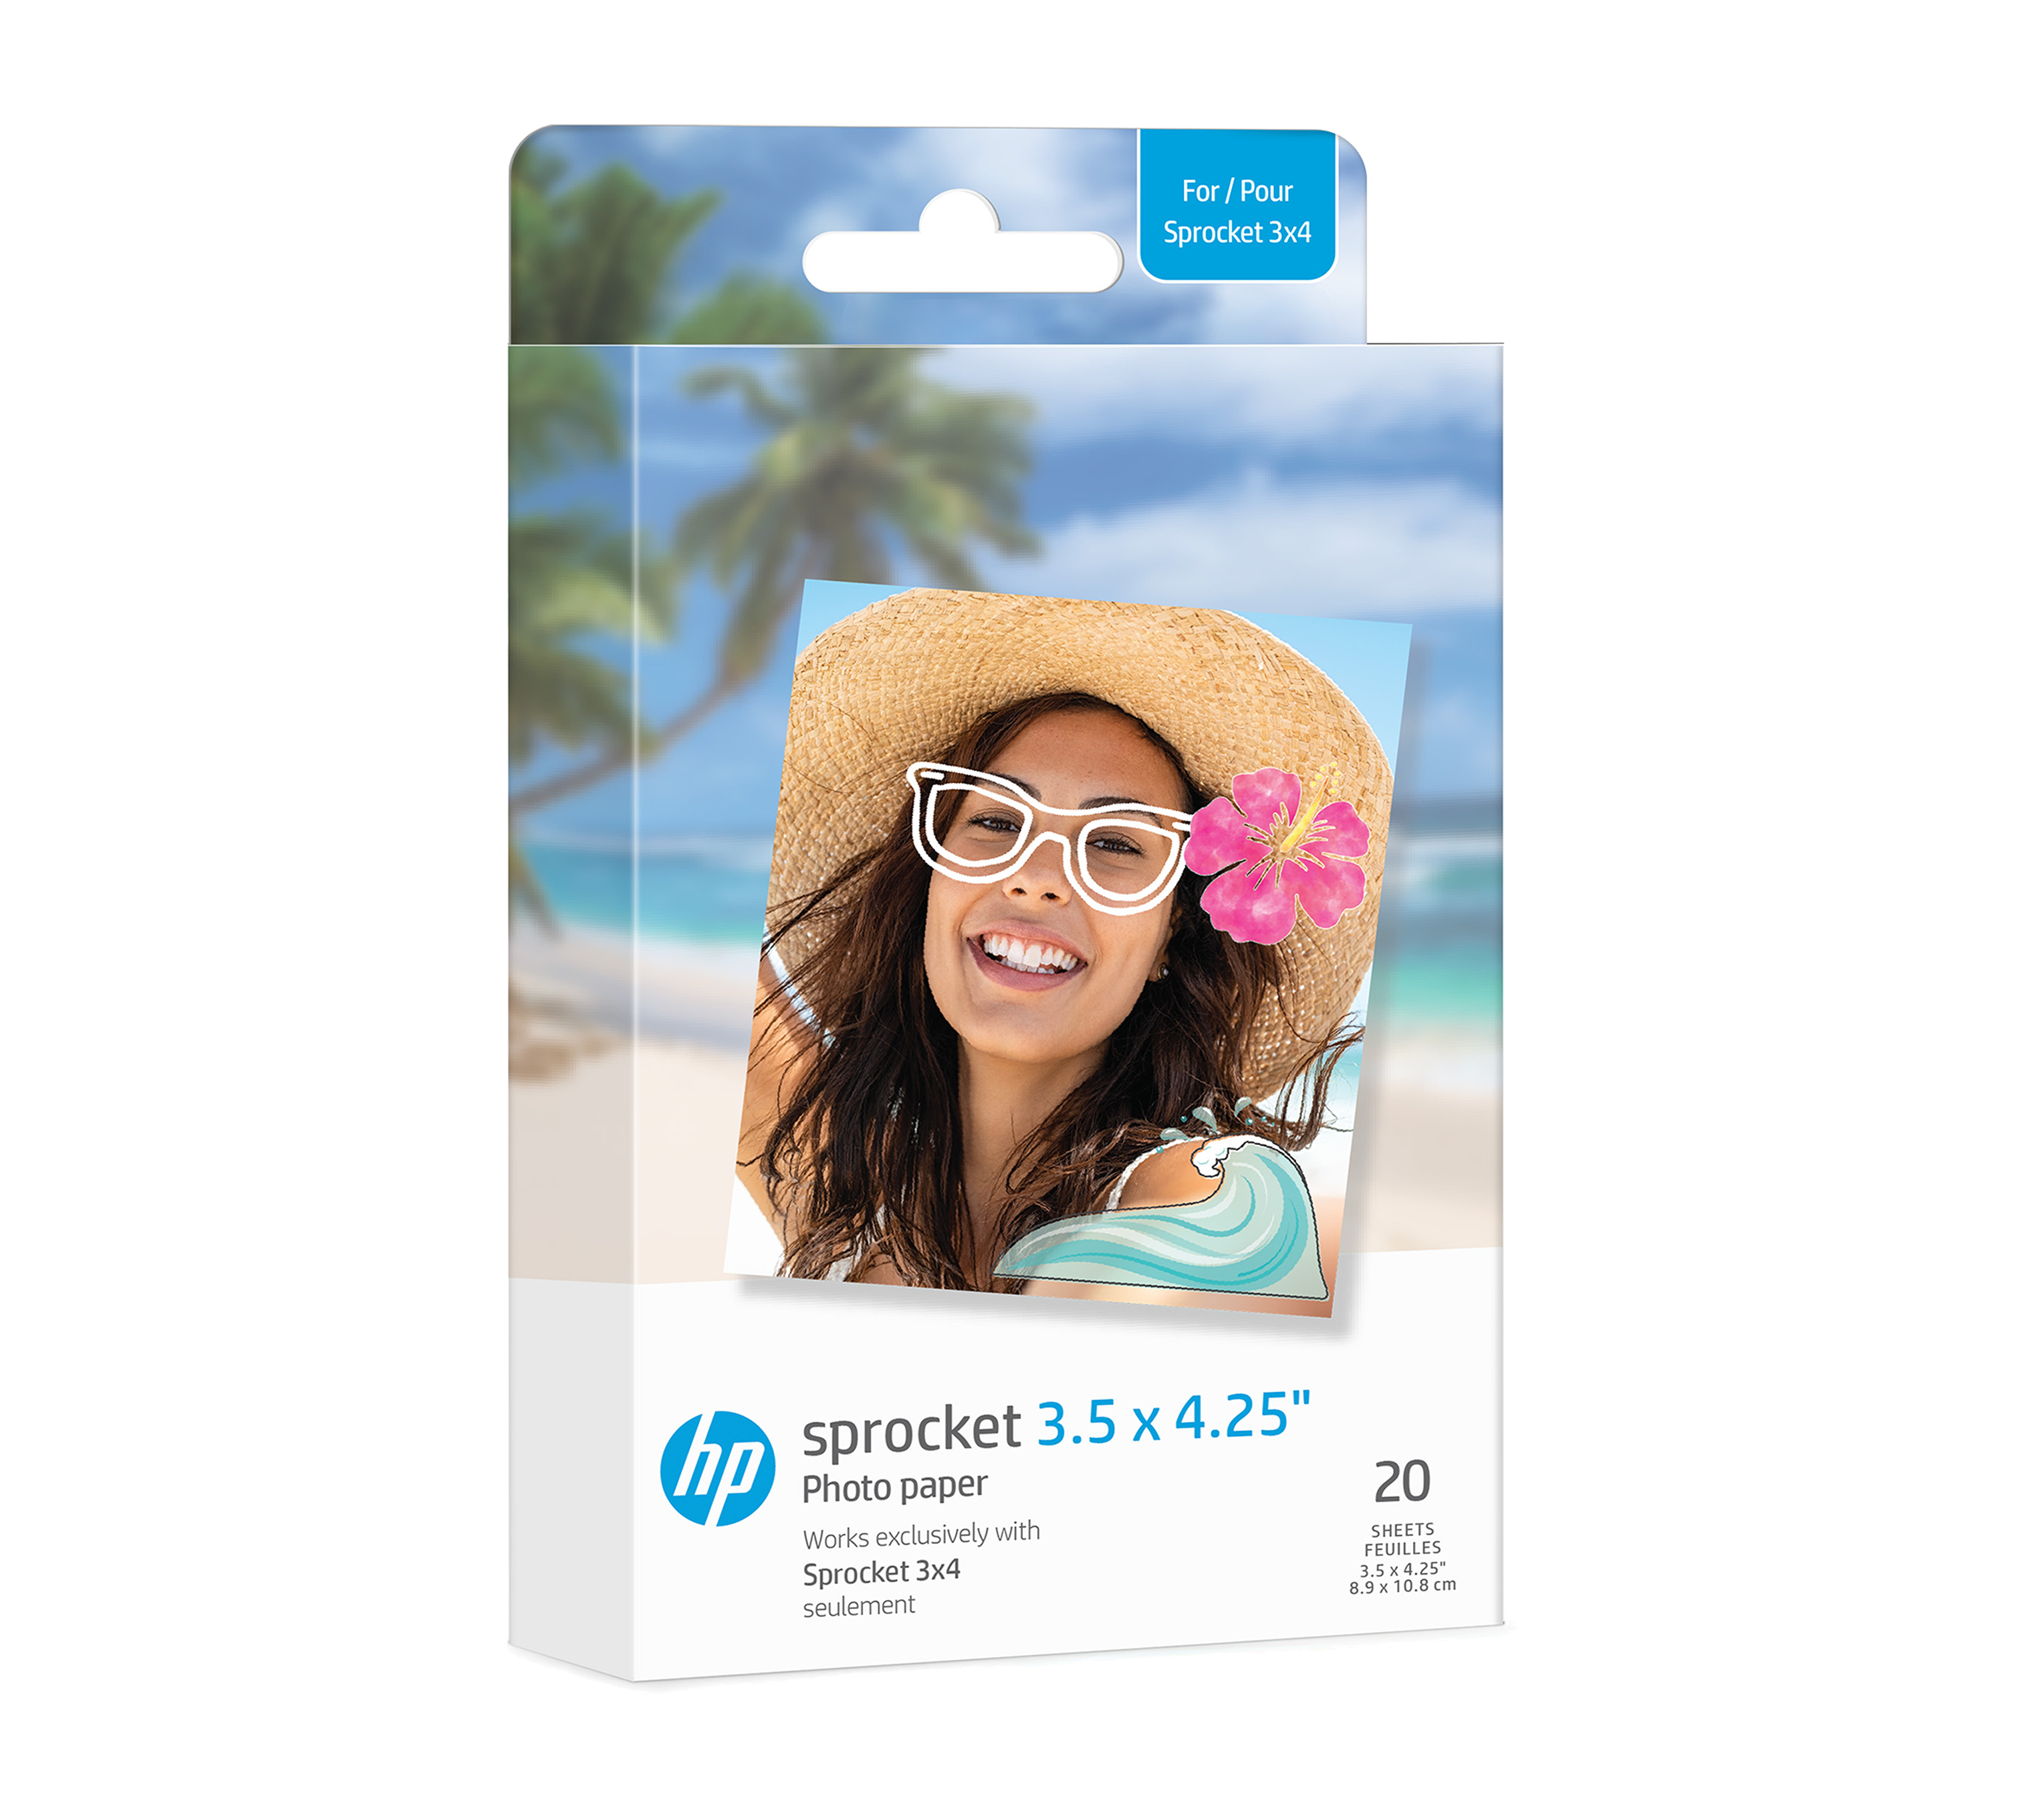 HP Sprocket 3.5 x 4.25” Zink Sticky-backed Photo Paper (20 Pack) Compatible with HP Sprocket 3x4 Photo Printer Sprocket Printers